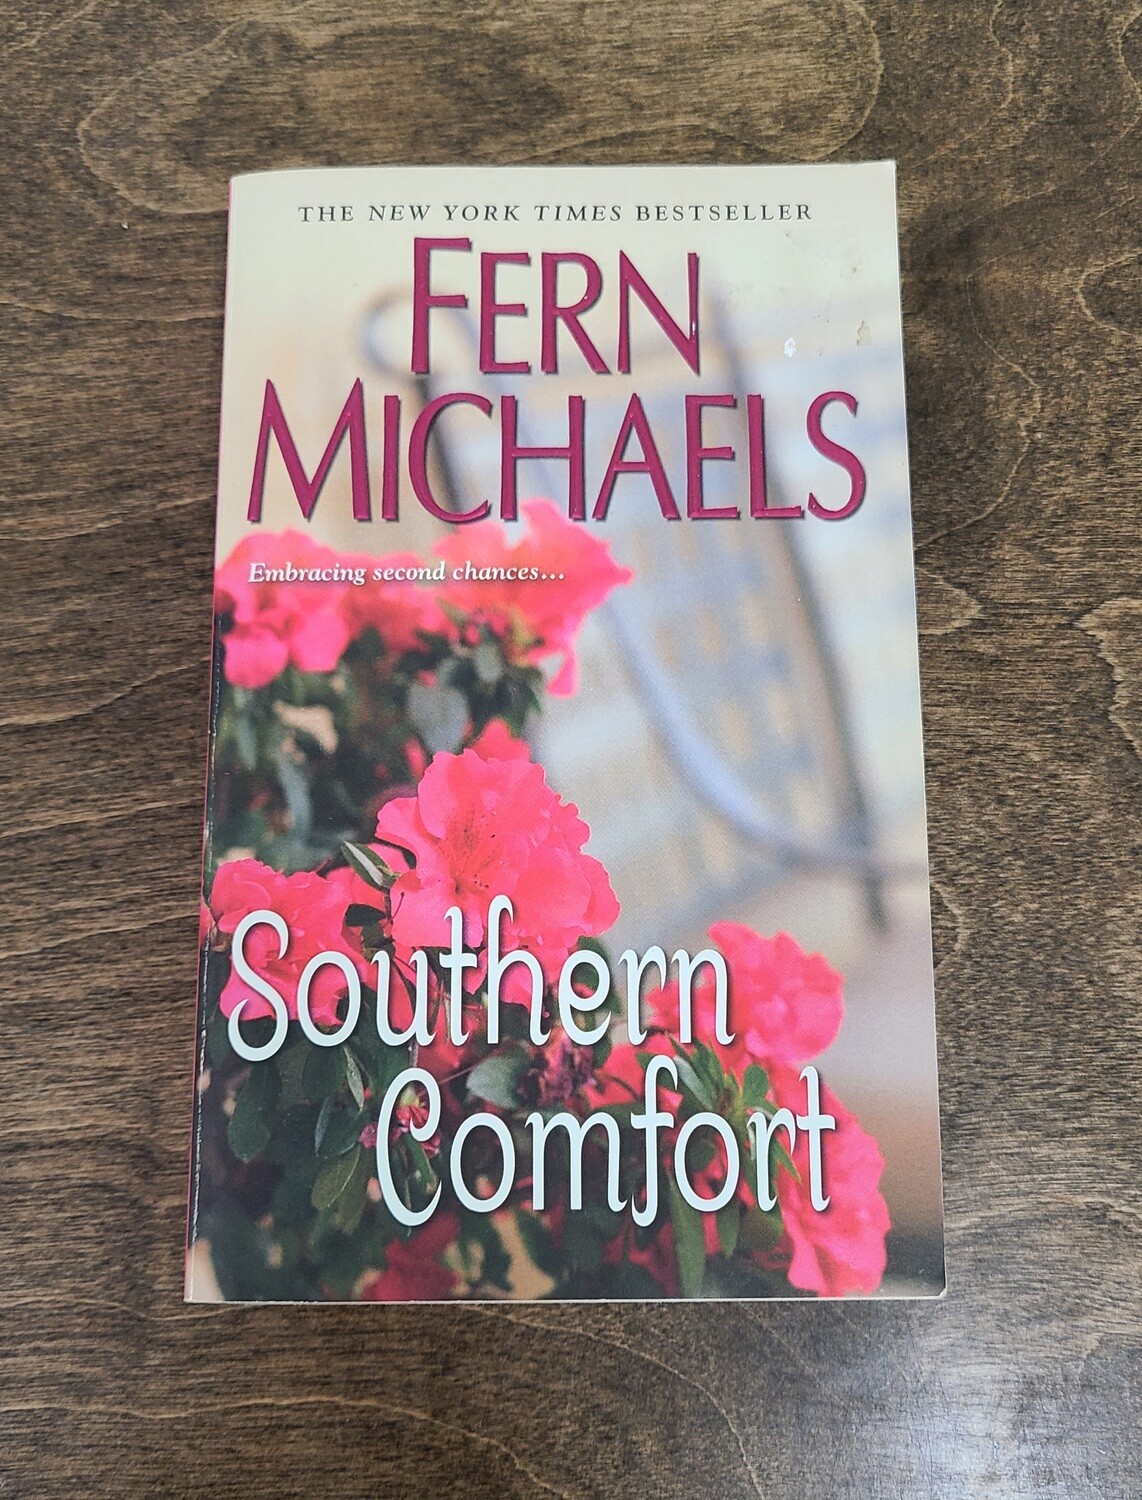 Southern Comfort by Fern Michaels